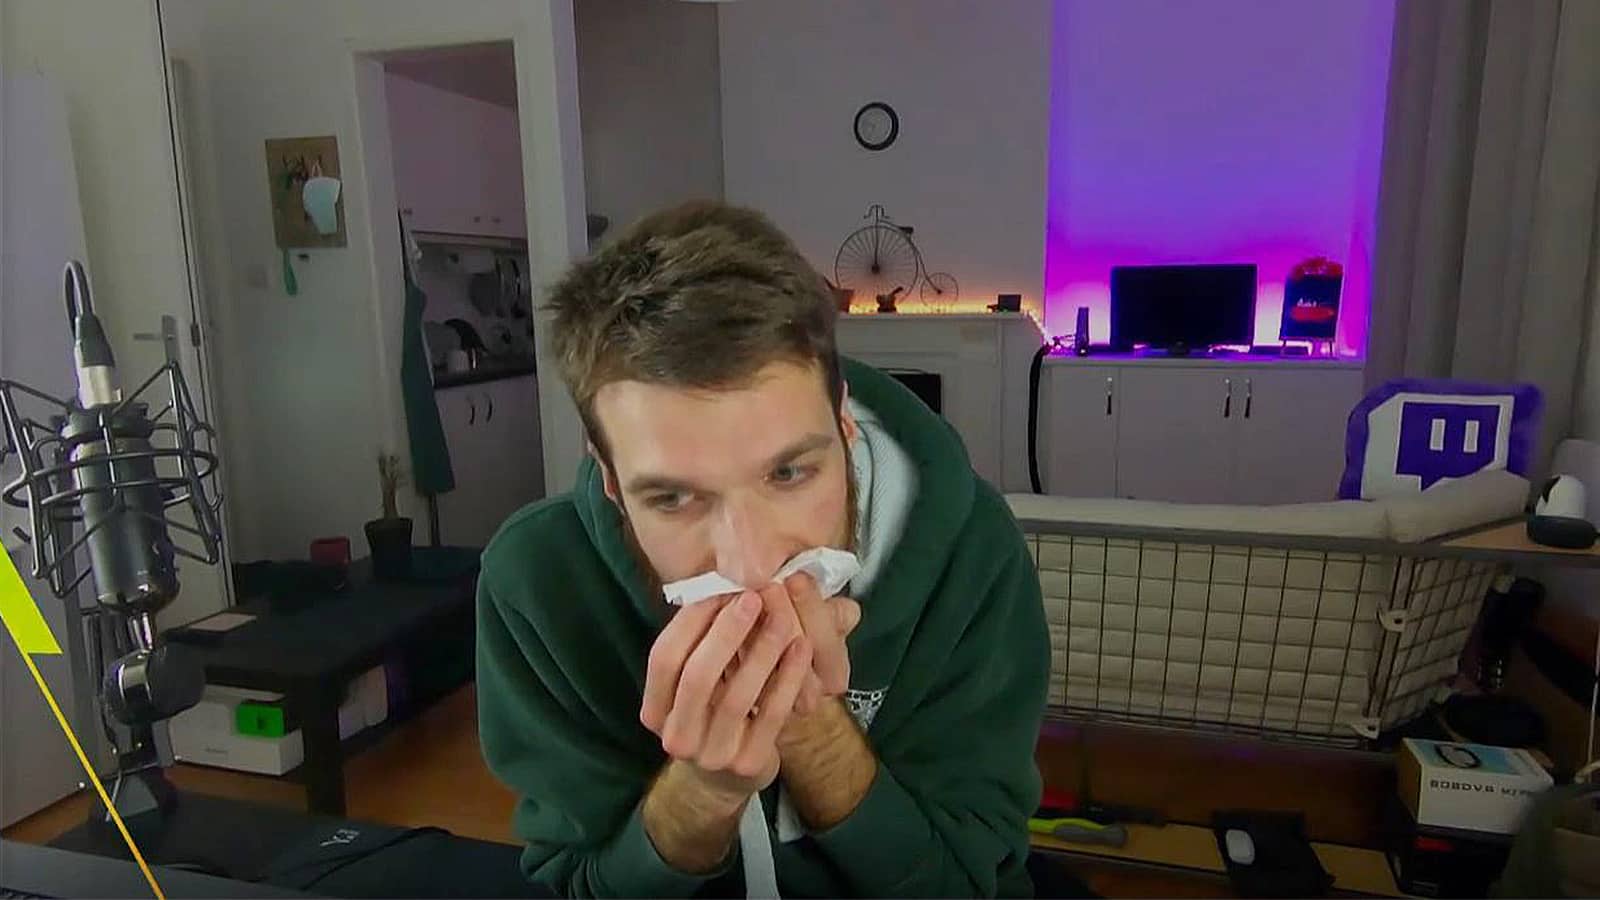 Twitch streamer ends VR accident: “I broke my mouth” -